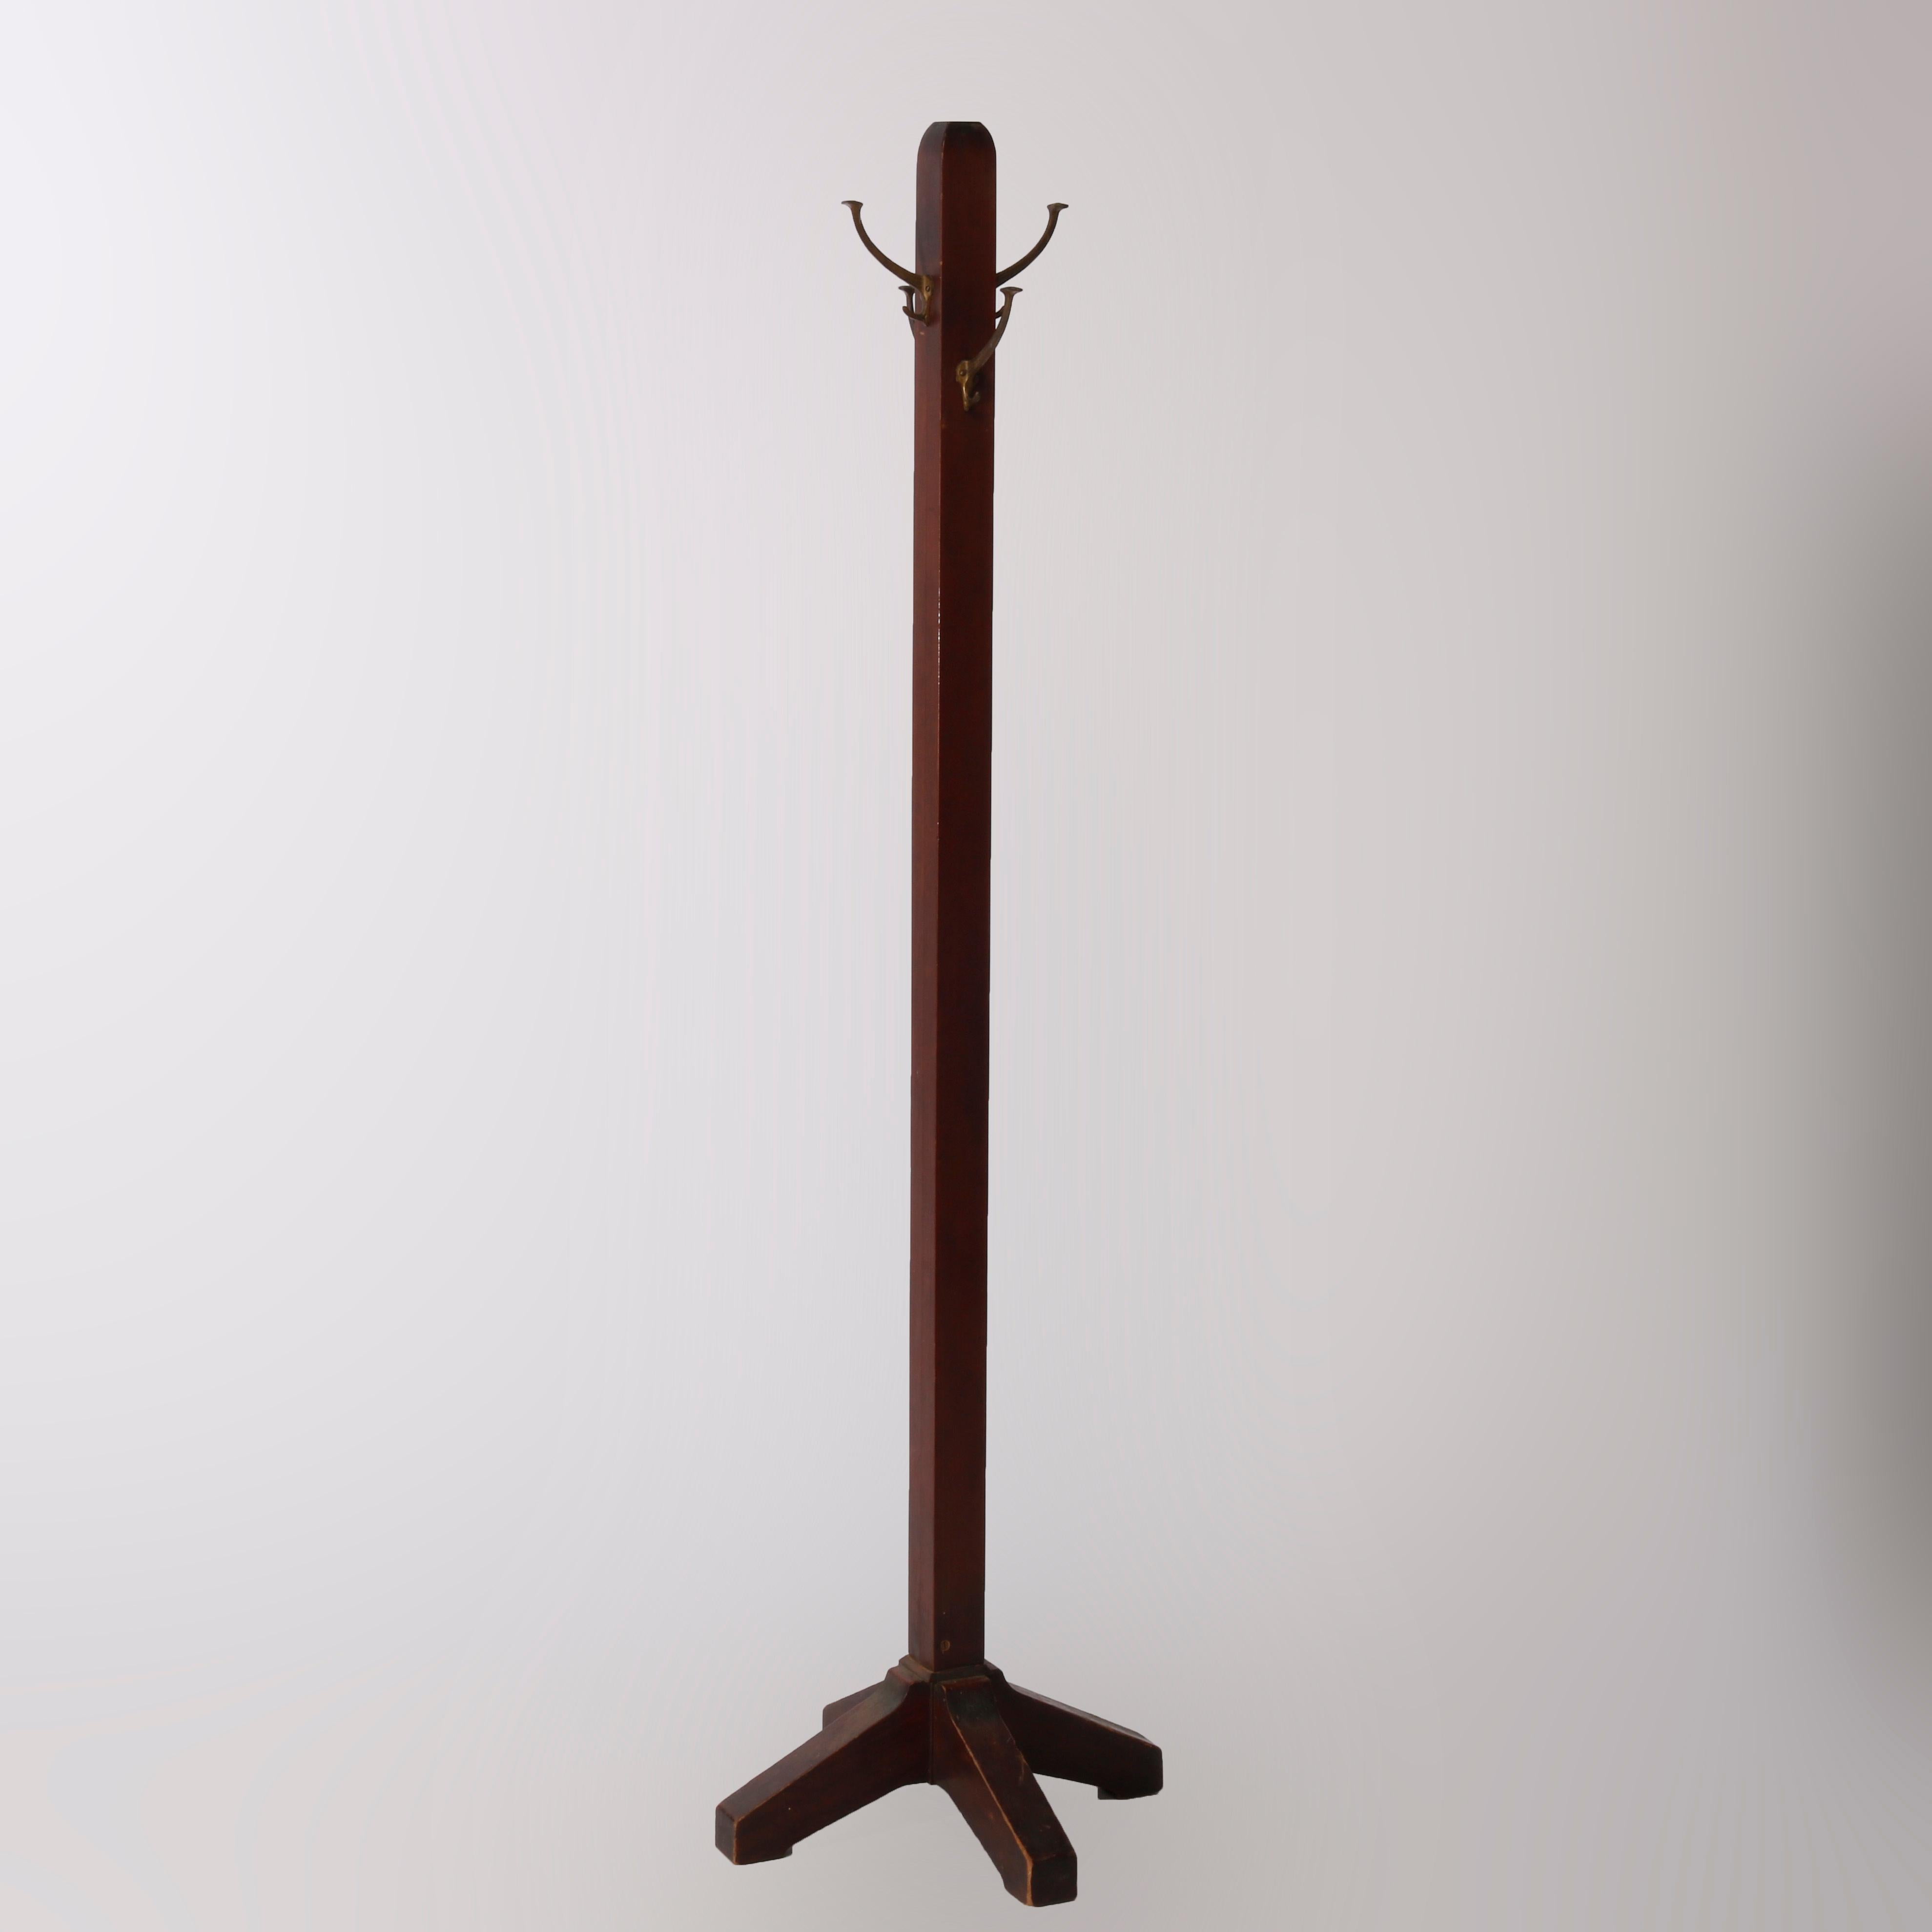 An antique Arts & Crafts Mission hall tree offers mahogany construction with rounded top and raised on tapered legs, c1910

Measures - 72'' H x 20.5'' W x 20.5'' D.